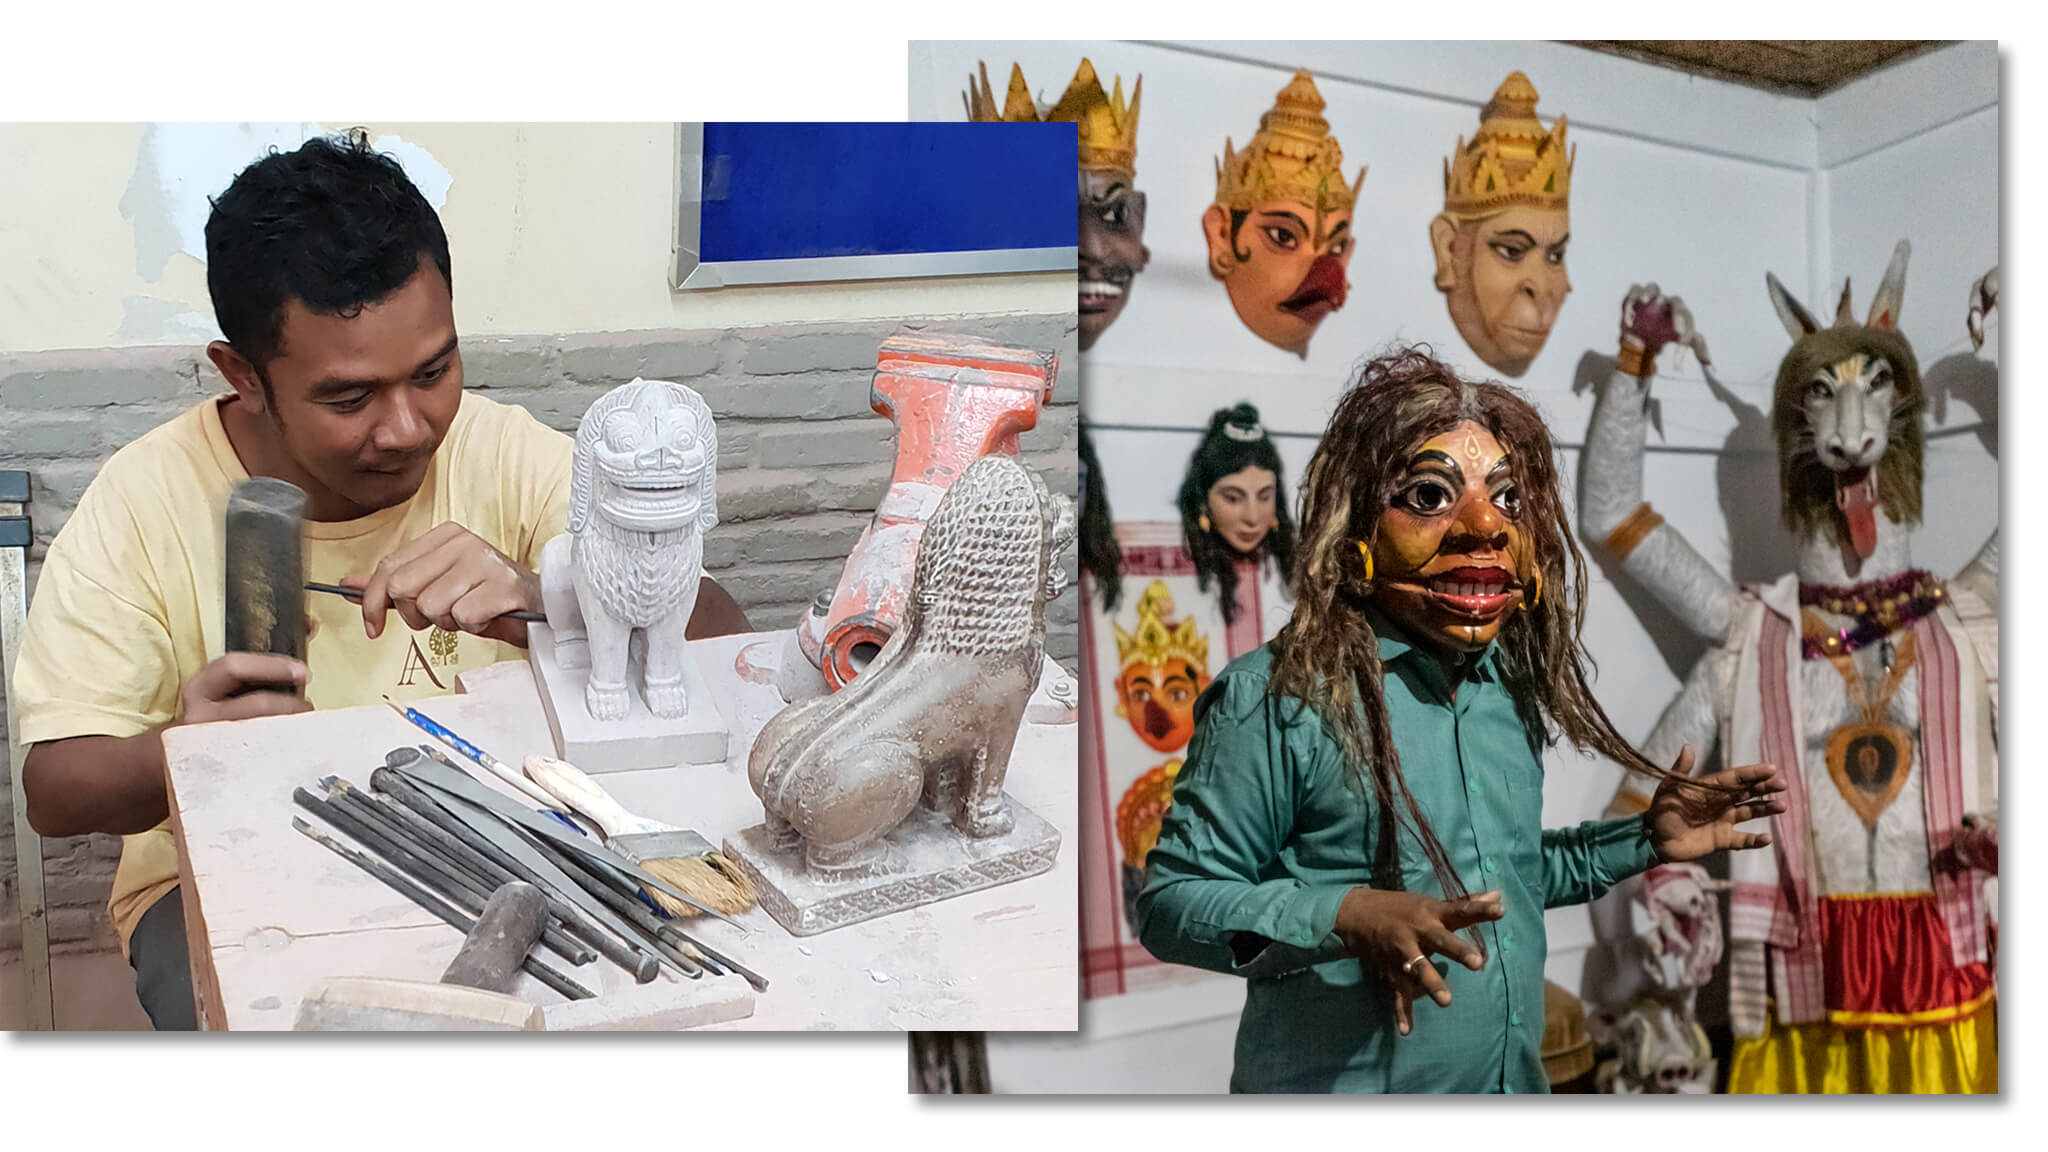 Sculpting and mask-making activities